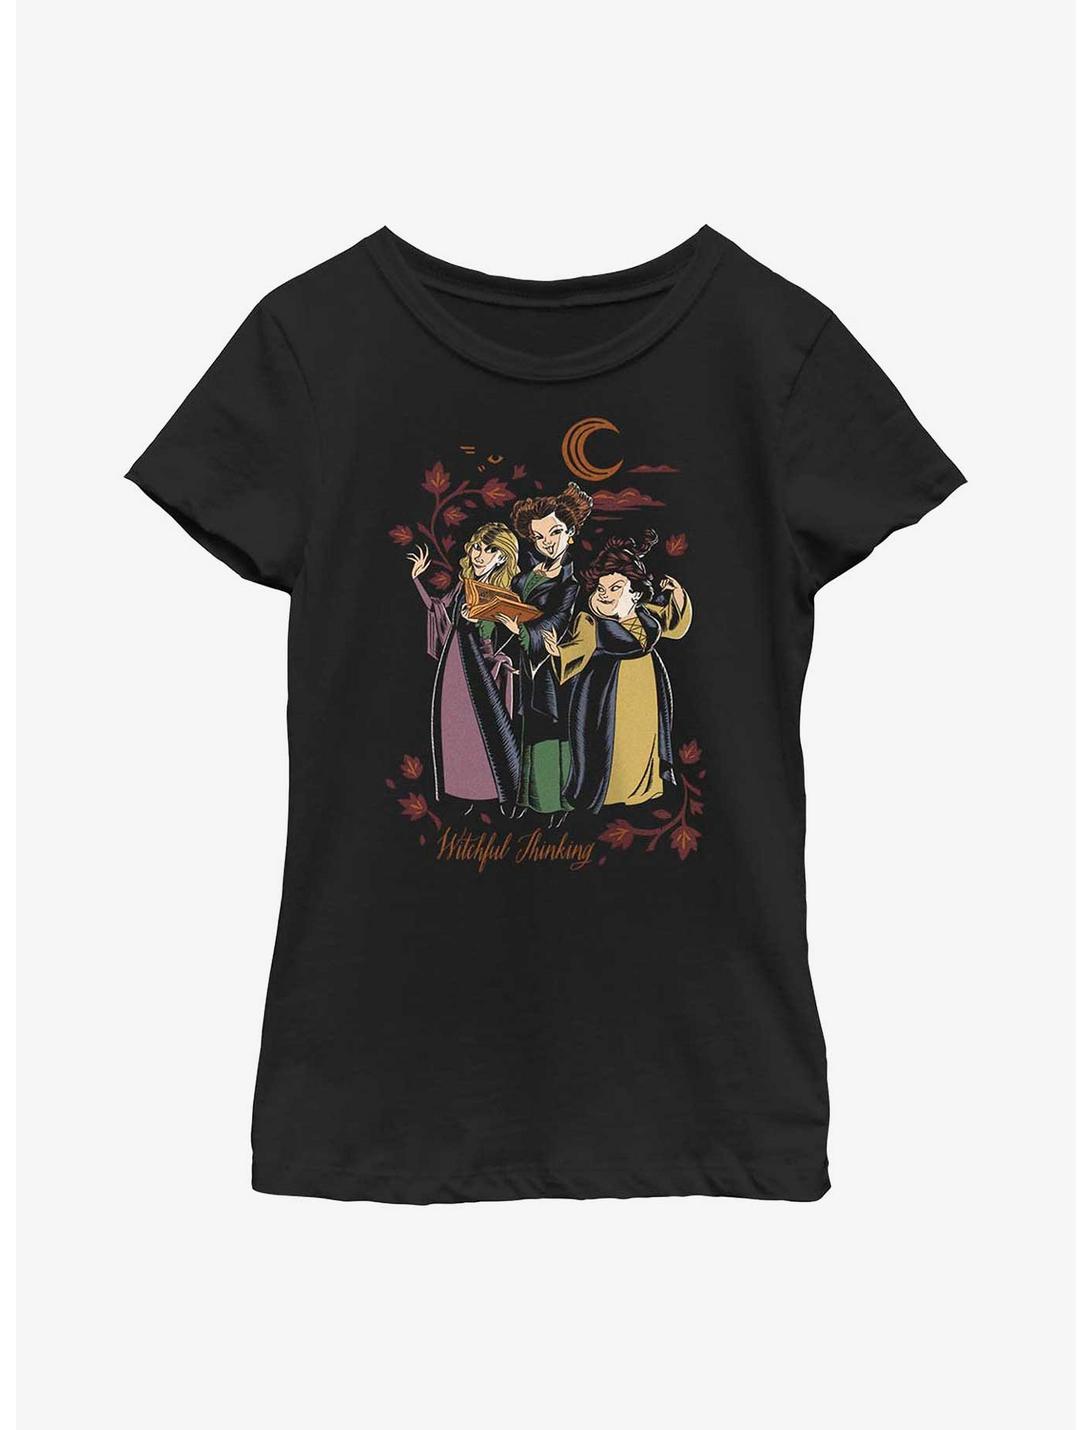 Disney Hocus Pocus 2 Witchful Thinking Sisters Youth Girls T-Shirt, BLACK, hi-res